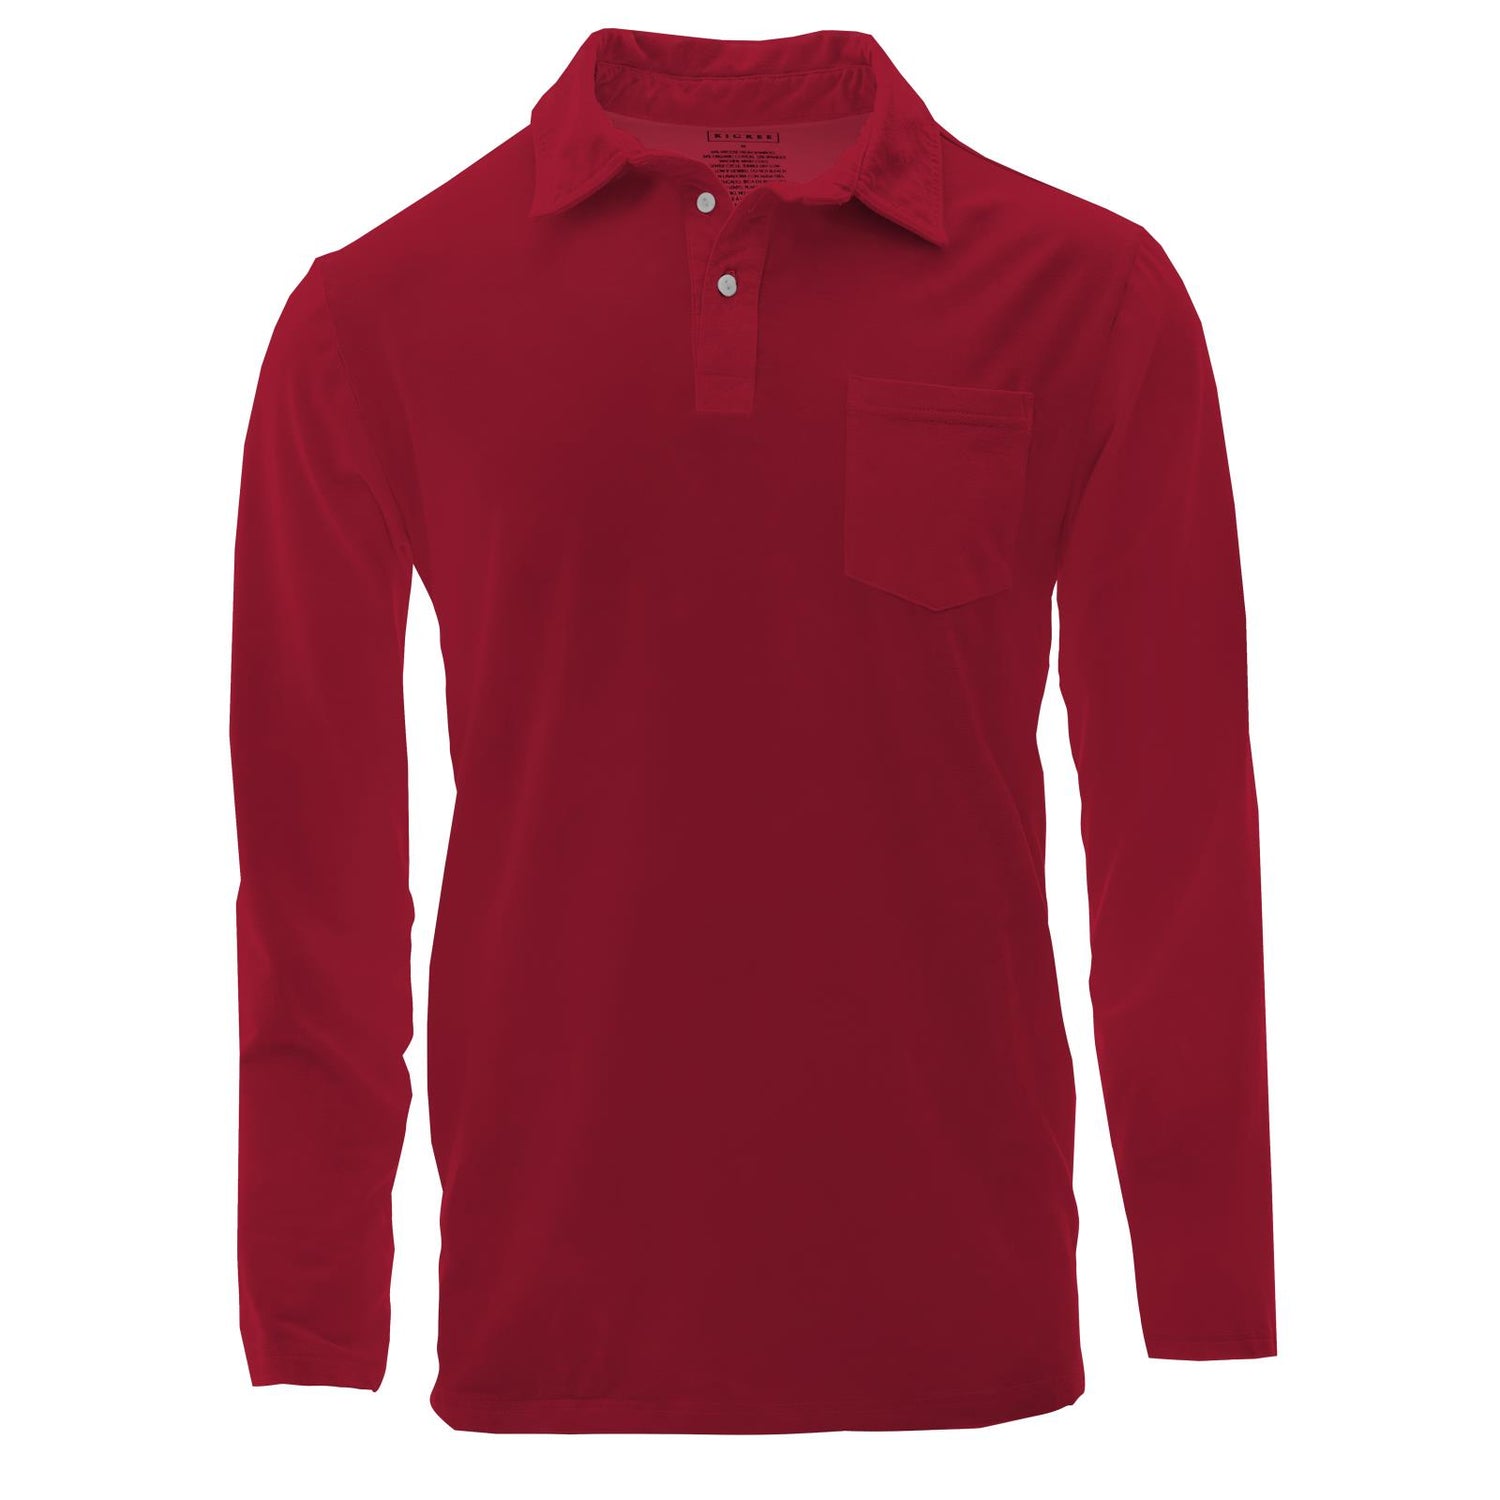 Men's Long Sleeve Luxe Jersey Polo with Pocket in Crimson